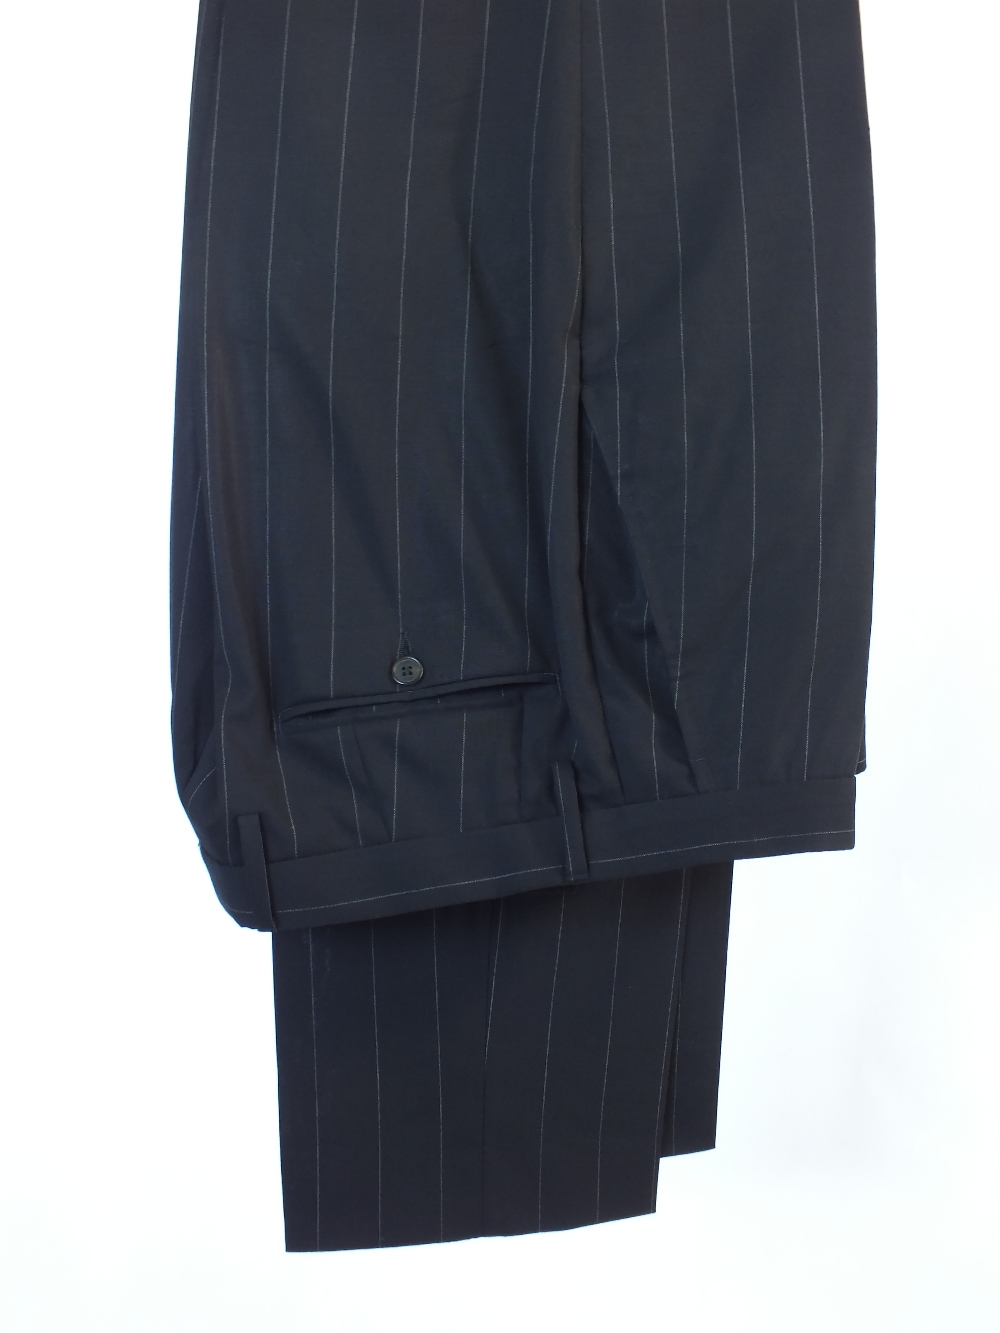 A Gucci suit navy blue pinstripe, double vent, Italian size 50R, 97% wool, 3% elastine, flat front - Image 5 of 7